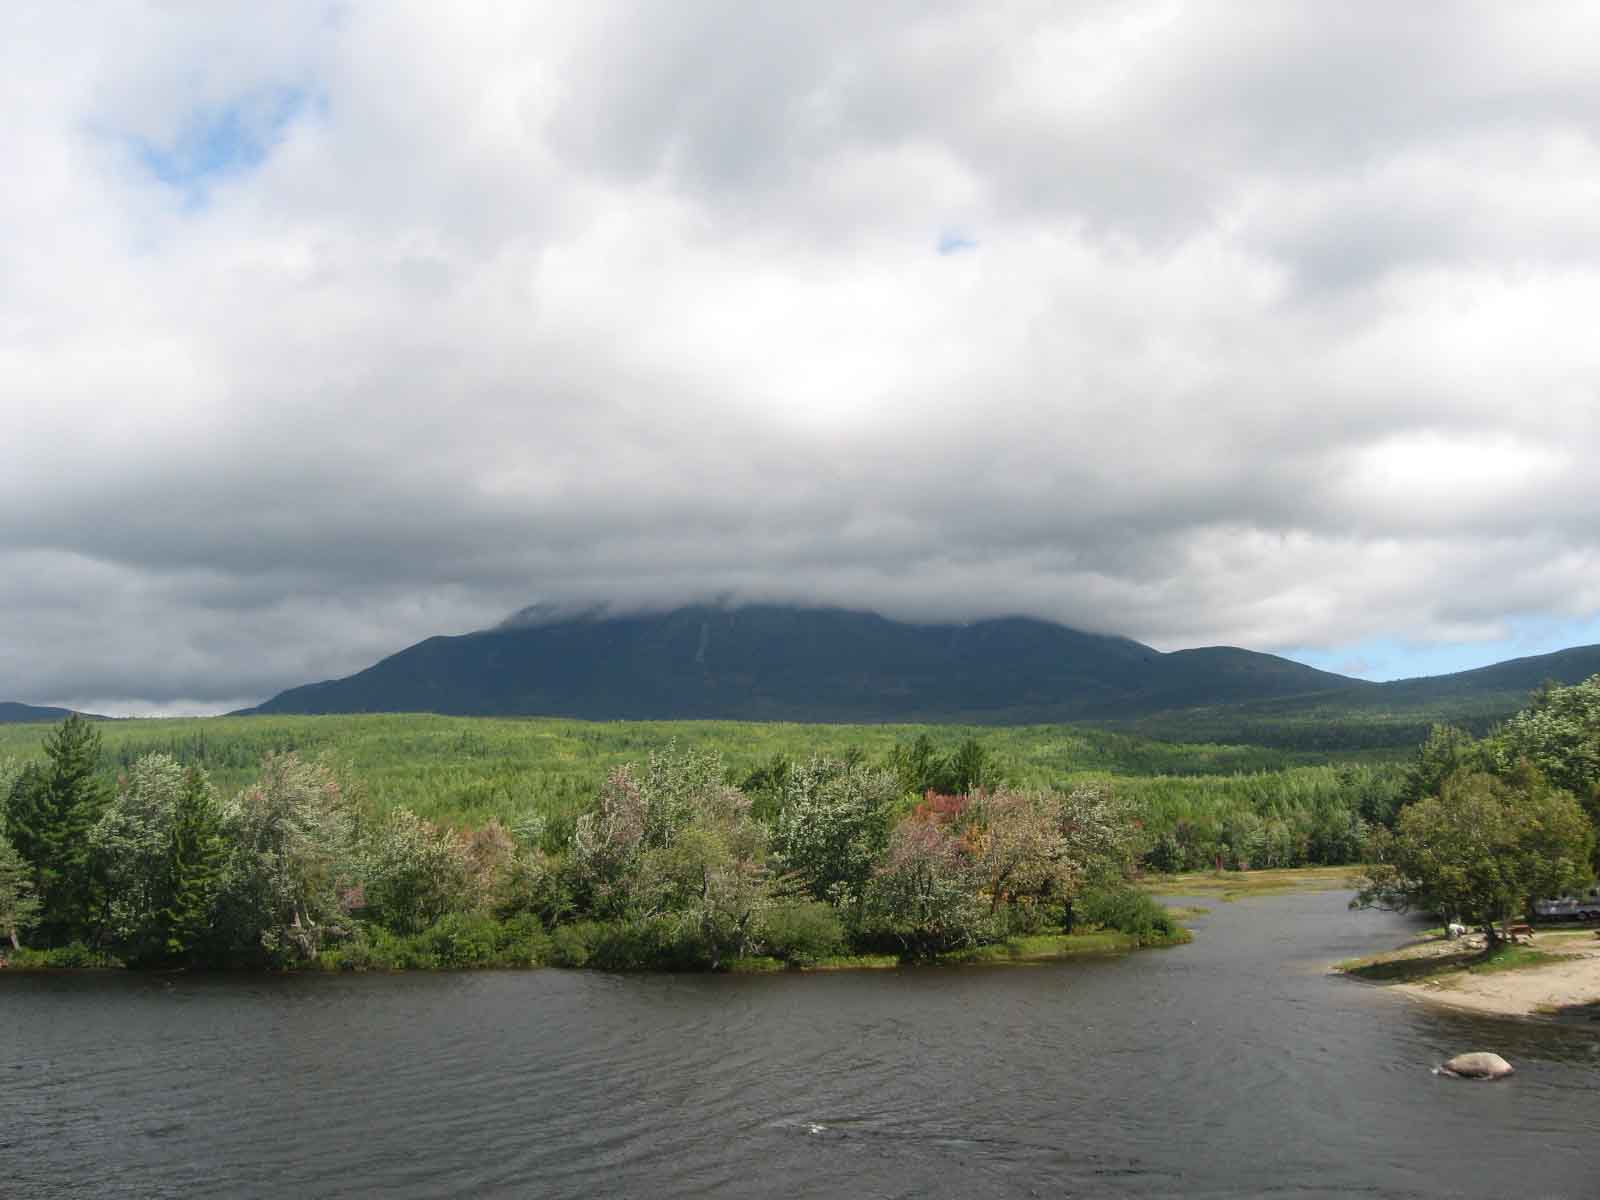 Team Excessives first view of Katahdin from Abol Bridge. The cloud covered the summit throughout the day.